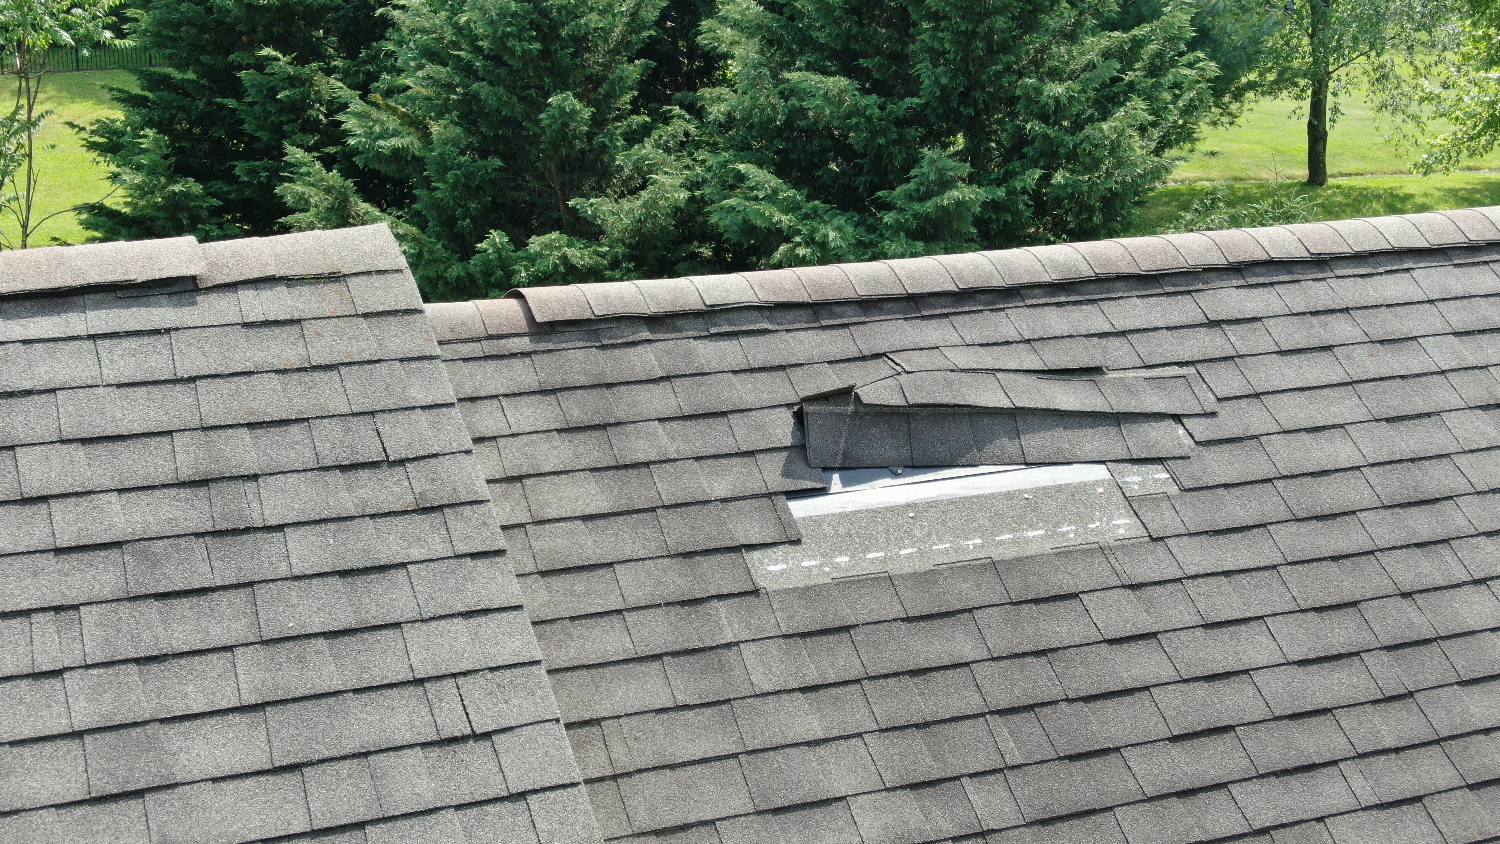 Roof with missing shingles, requiring replacement